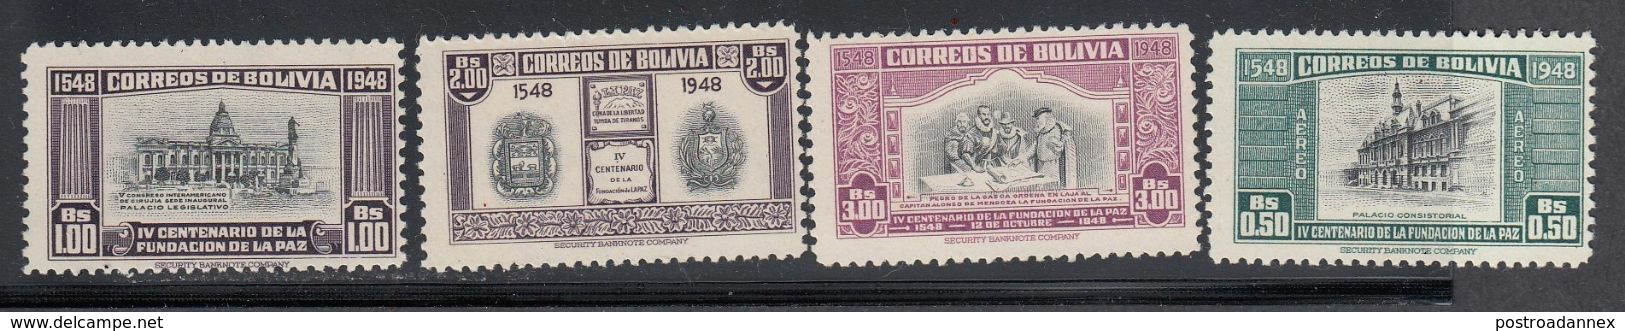 Bolivia, Scott #346, 348-349, C143, Mint Never Hinged, 400th Anniversary Of Founding Of La Paz, Issued 1951 - Bolivien